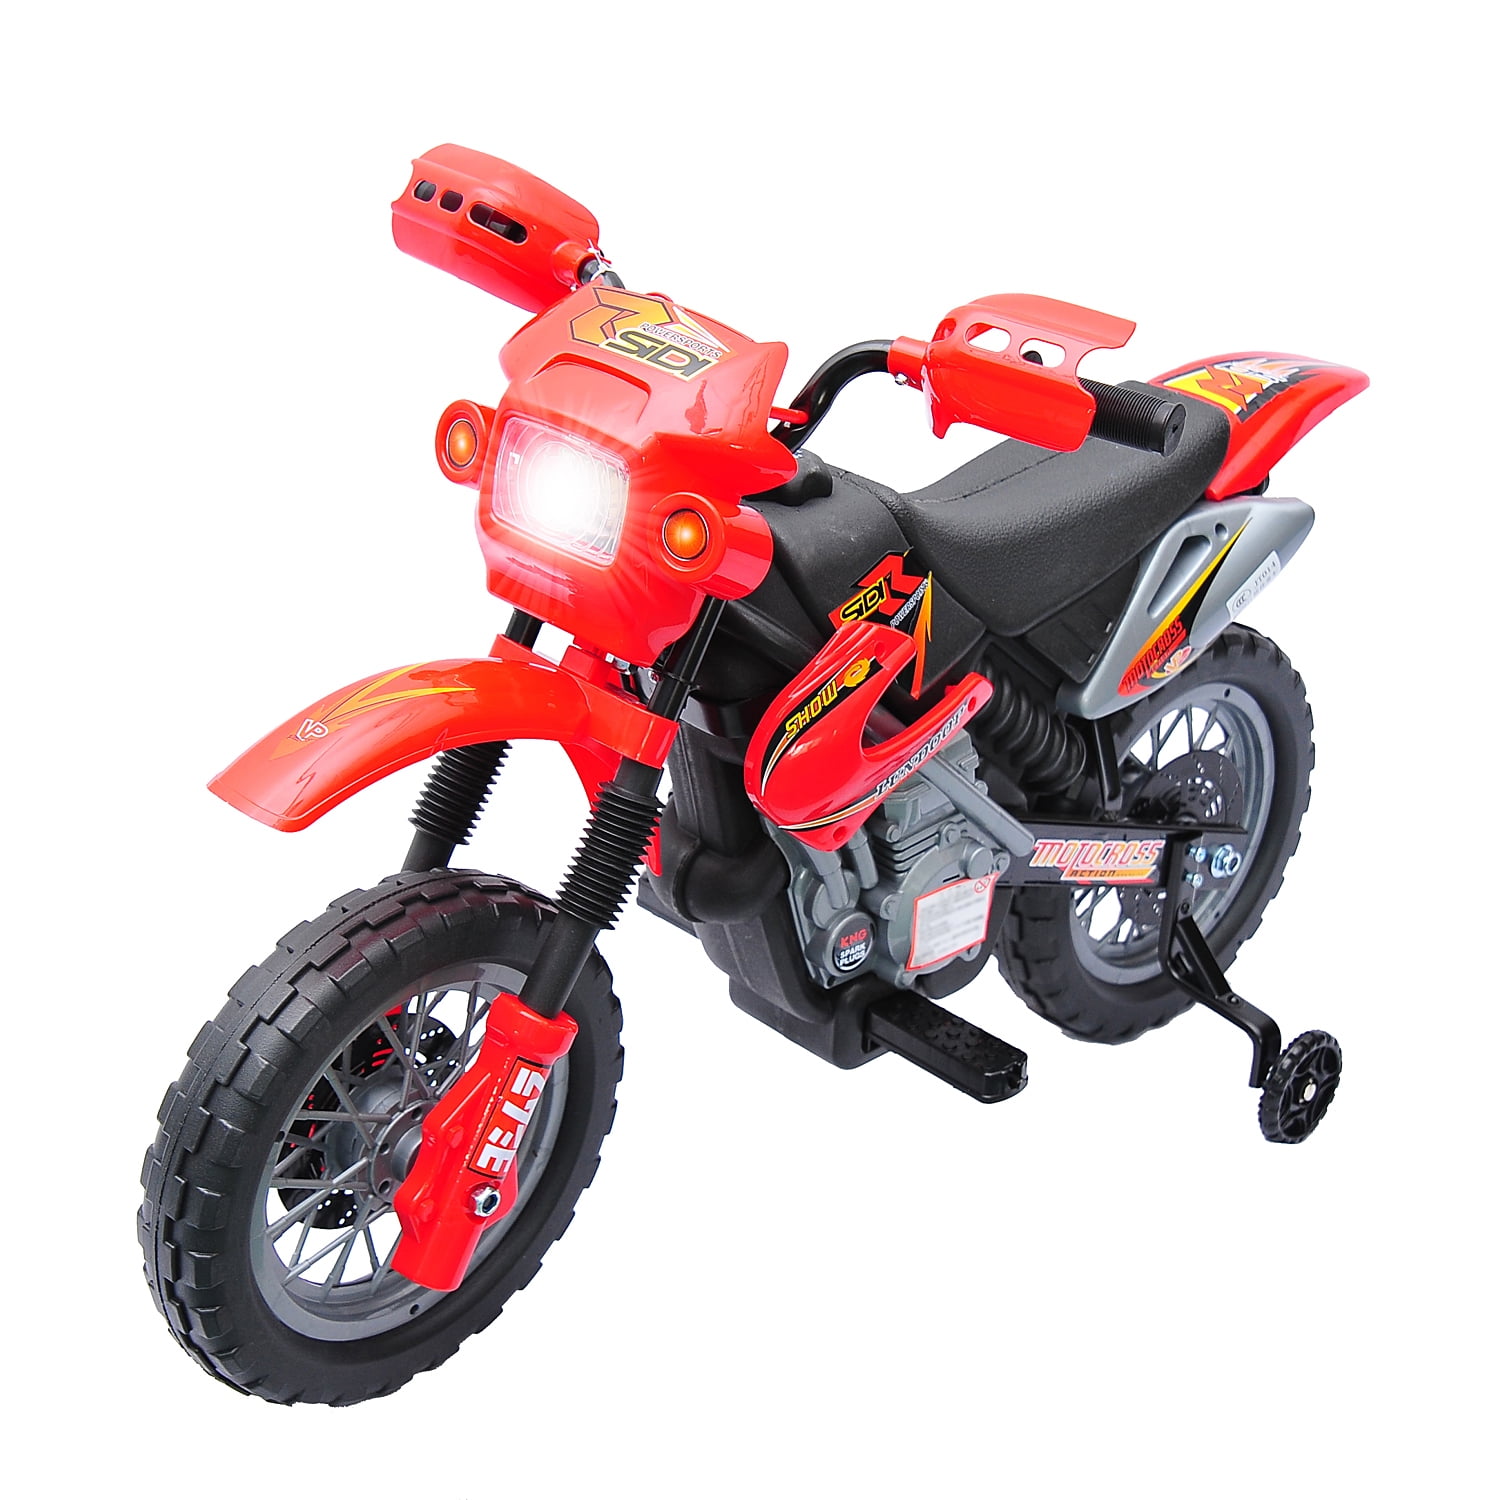 3 Wheel Kids Ride On Motorcycle Toy 6V Battery Powered Electric Bicycle Red 